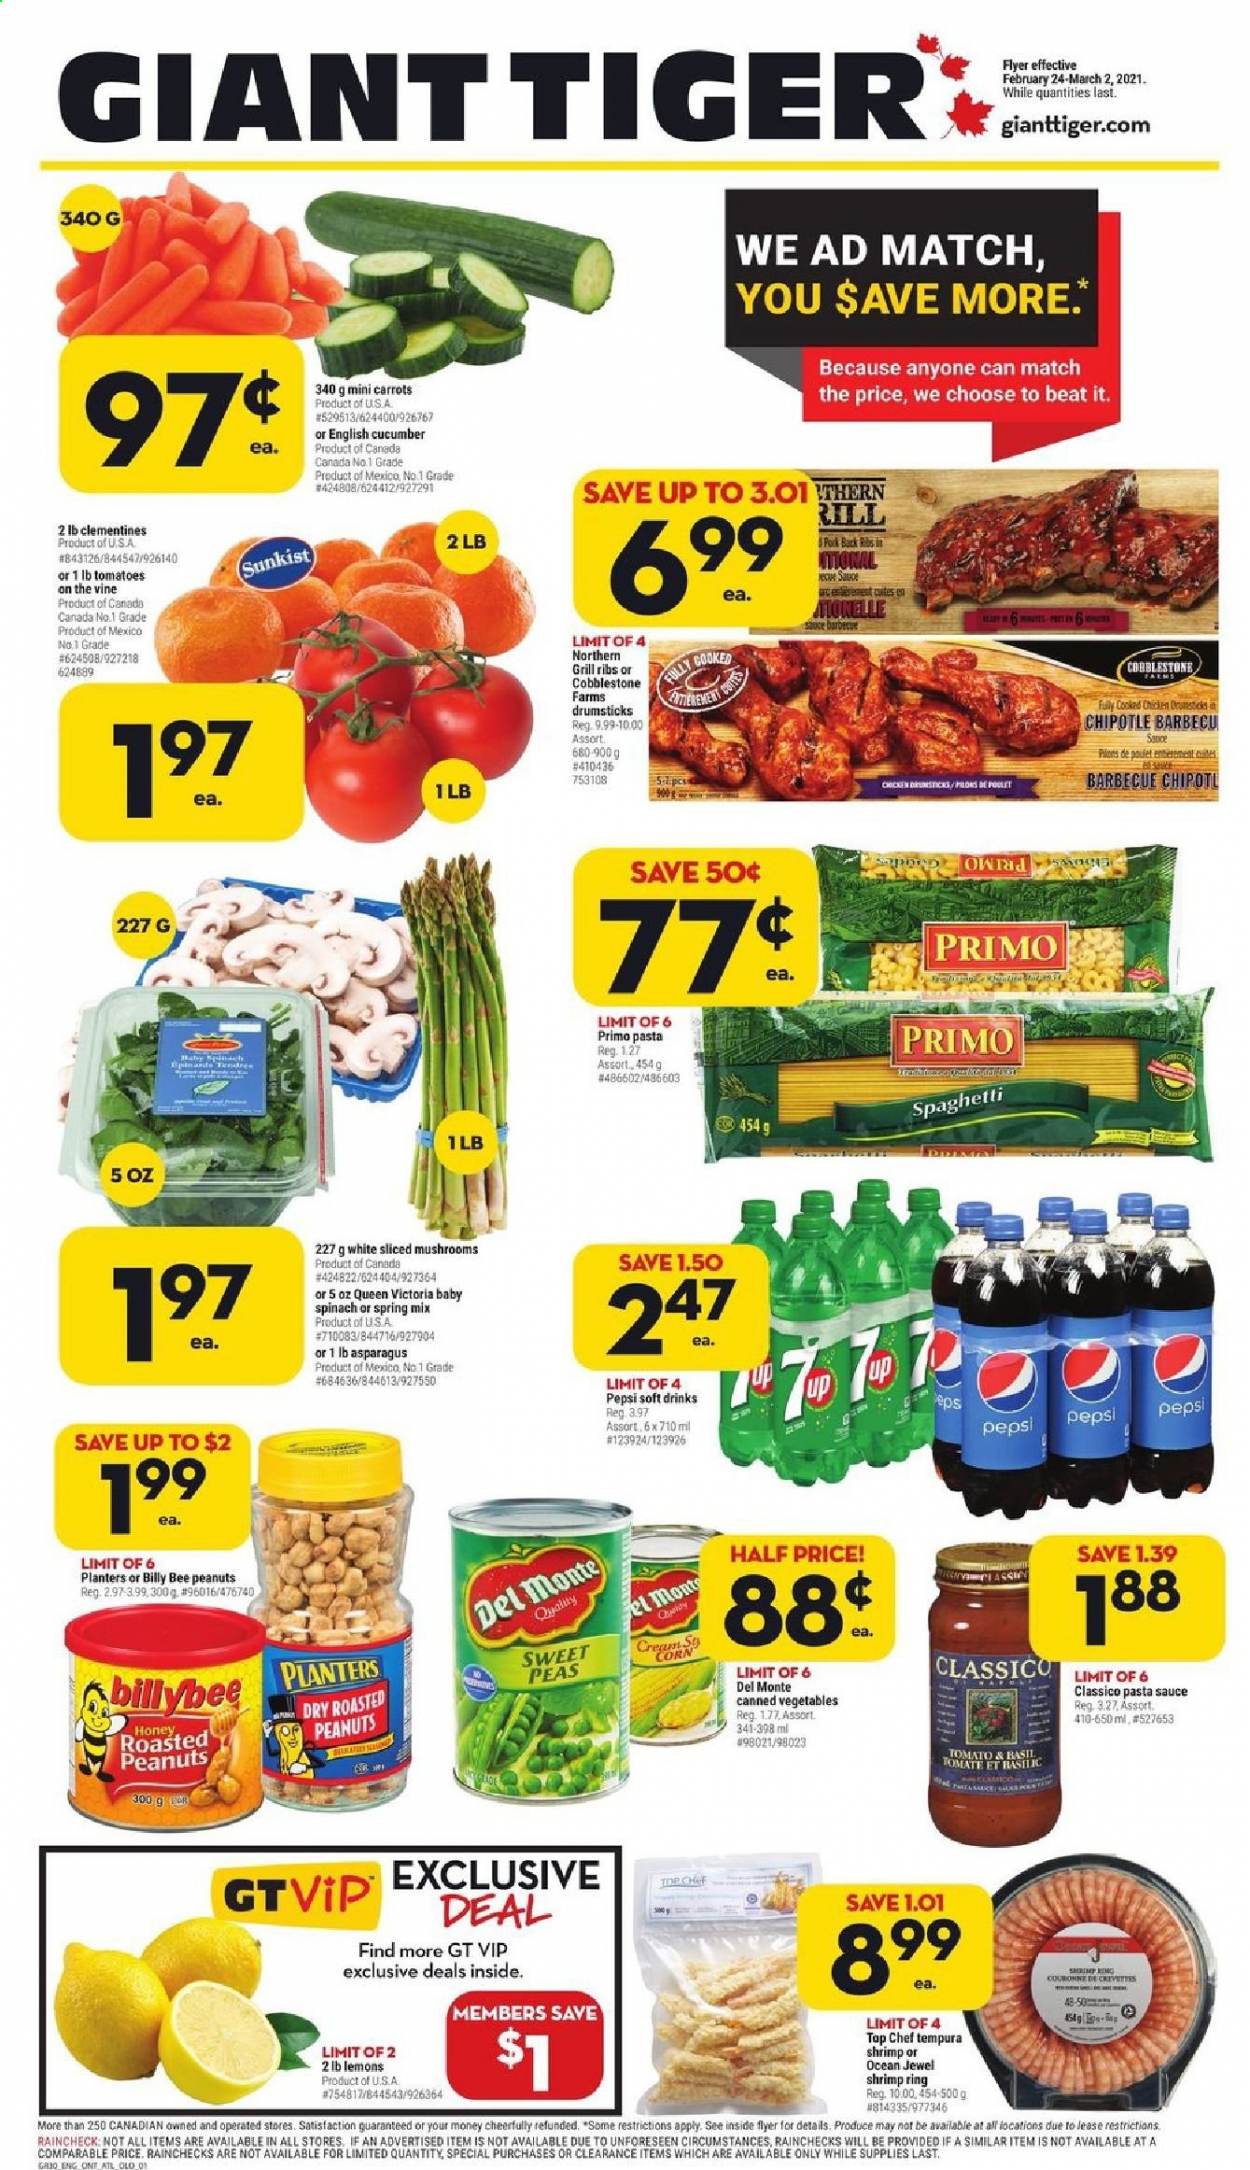 thumbnail - Giant Tiger Flyer - February 24, 2021 - March 02, 2021 - Sales products - mushrooms, asparagus, carrots, corn, cucumber, tomatoes, peas, baby spinach, clementines, lemons, shrimps, spaghetti, pasta sauce, sauce, breaded shrimps, canned vegetables, Del Monte, Classico, roasted peanuts, peanuts, Planters, Pepsi, soft drink, carbonated soft drink, chicken drumsticks, pork meat, pork ribs, pork back ribs. Page 1.